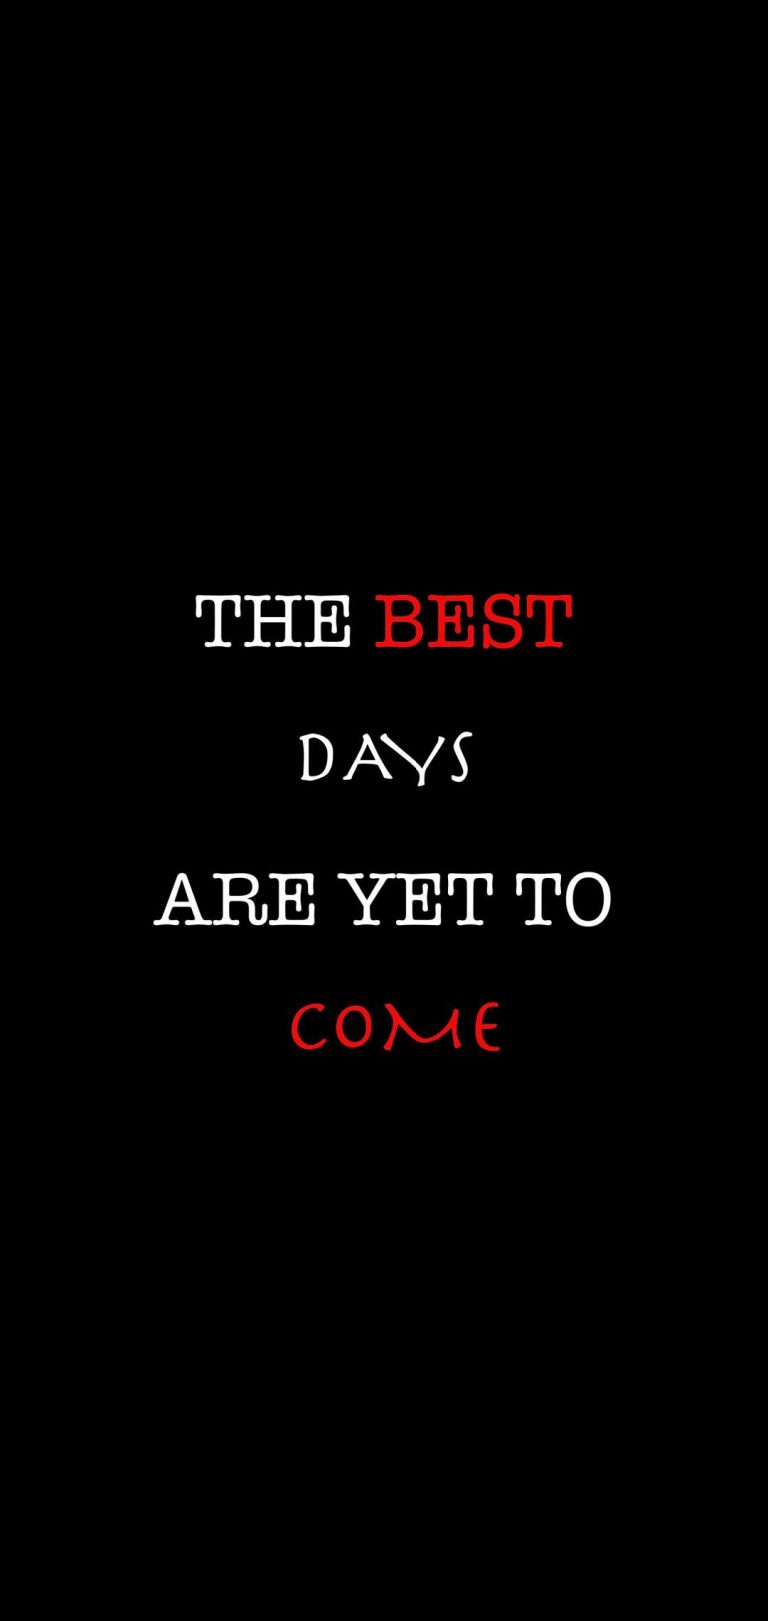 The Best Days are Yet to Come Wallpaper